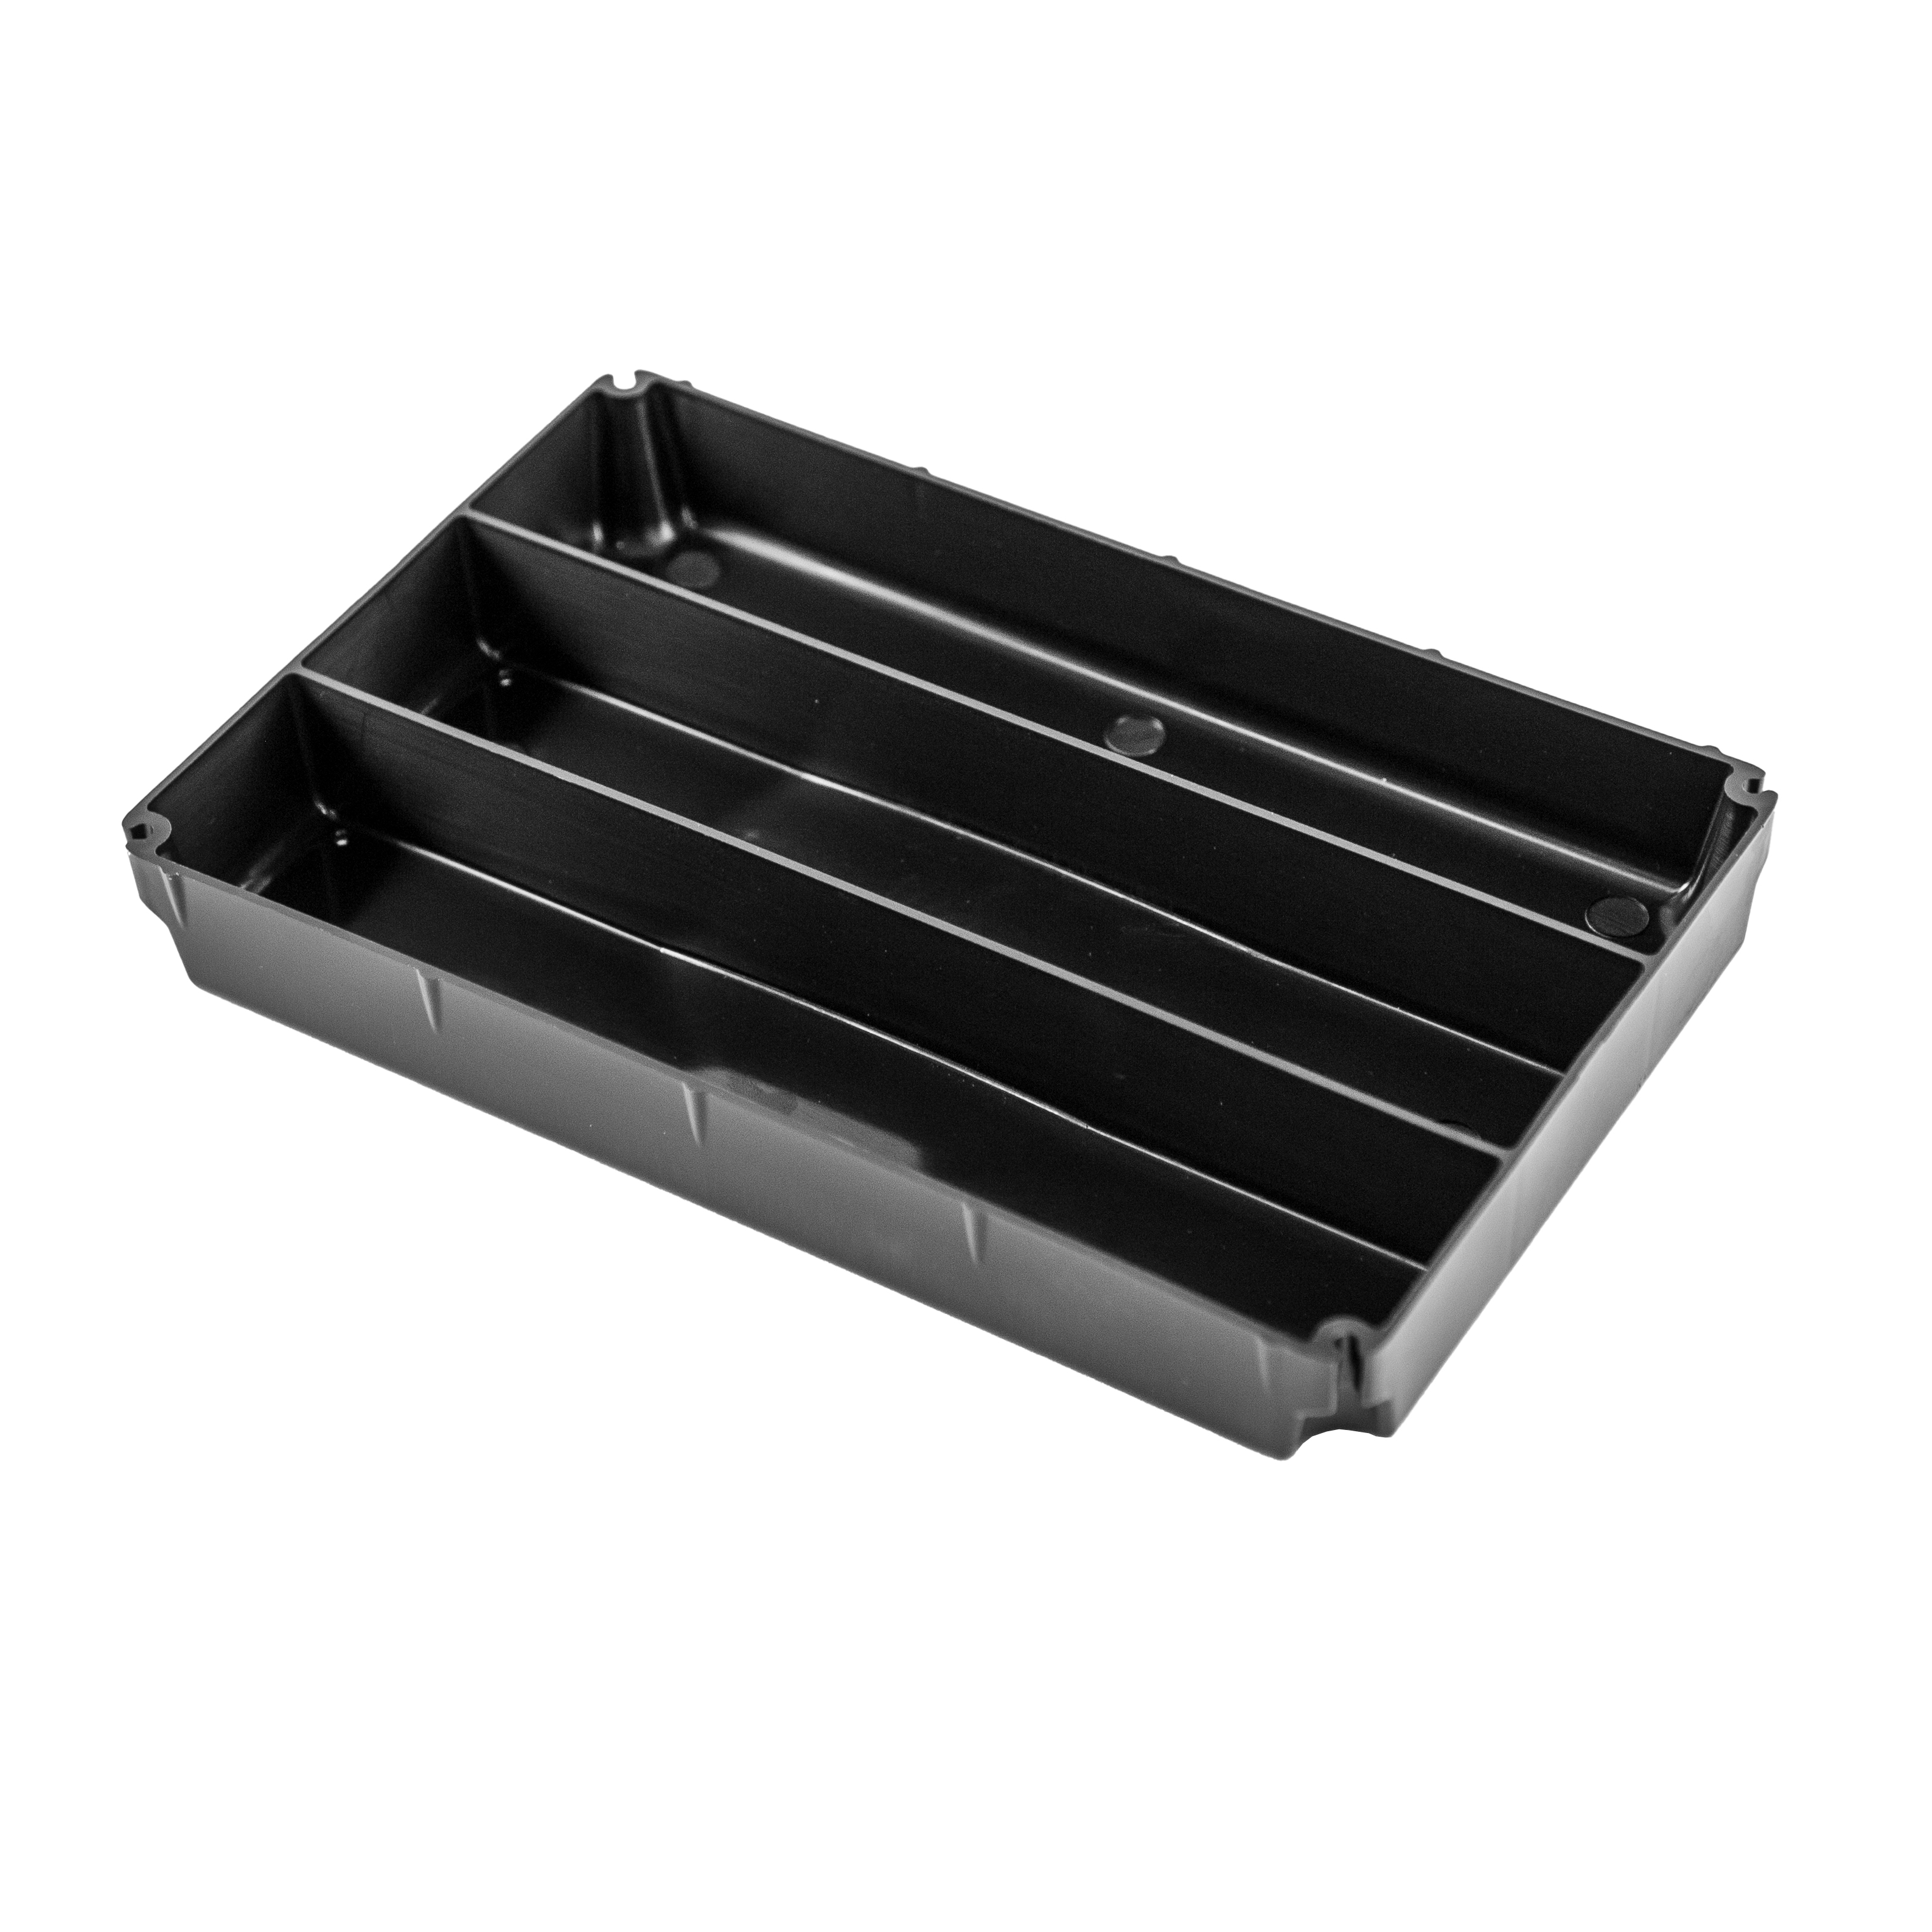 1x3 tackle tray for the YakAttack TracPak